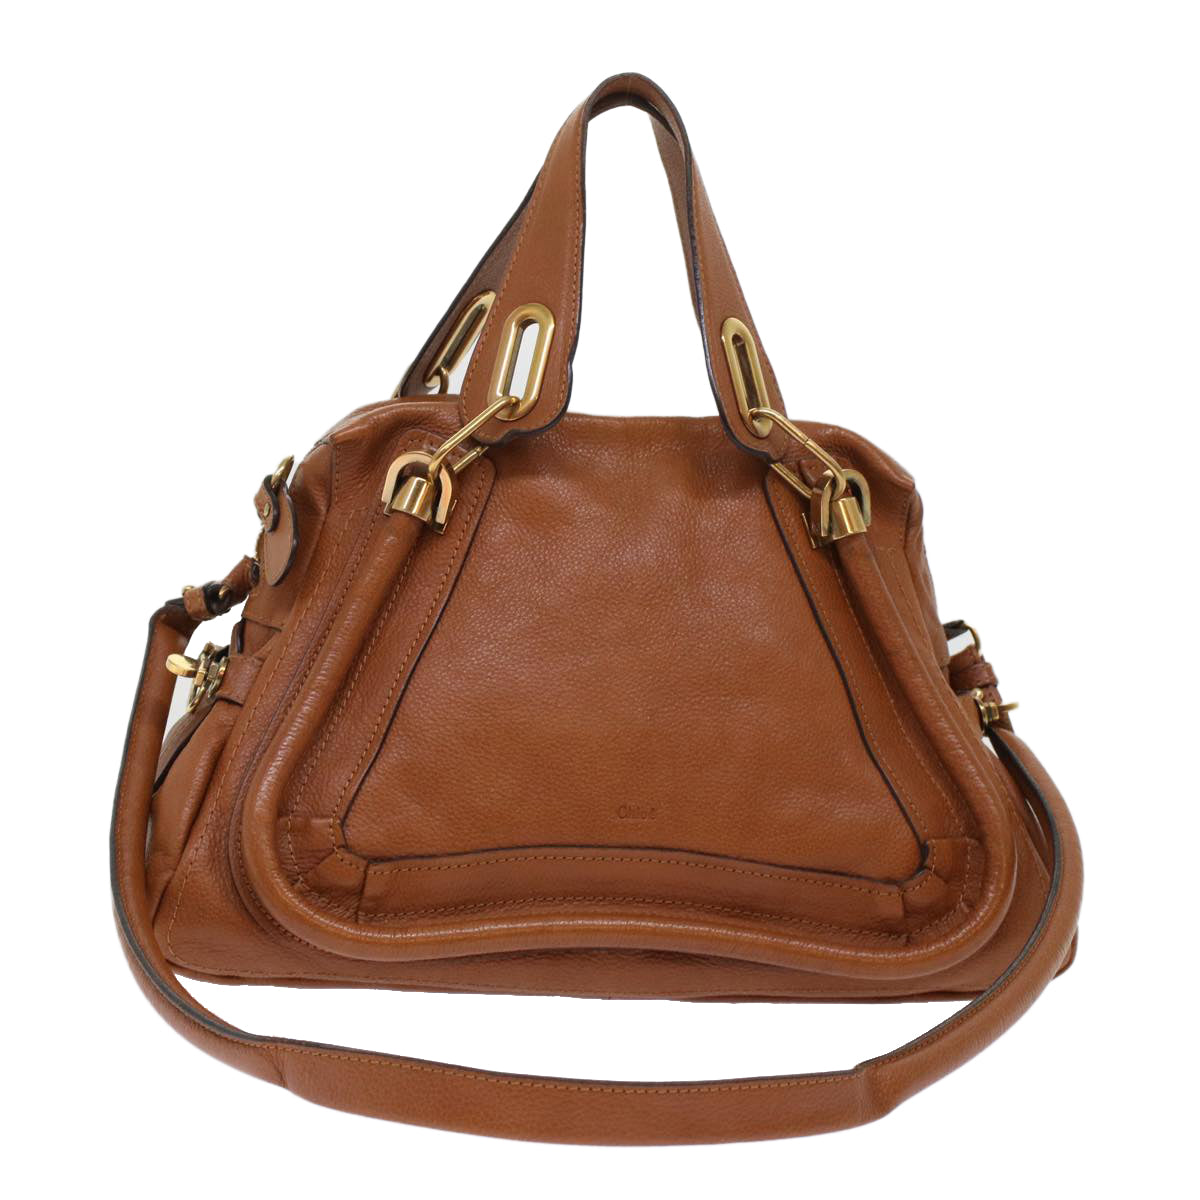 Chloe Paraty Shoulder Bag Leather 2way Brown Auth am4763